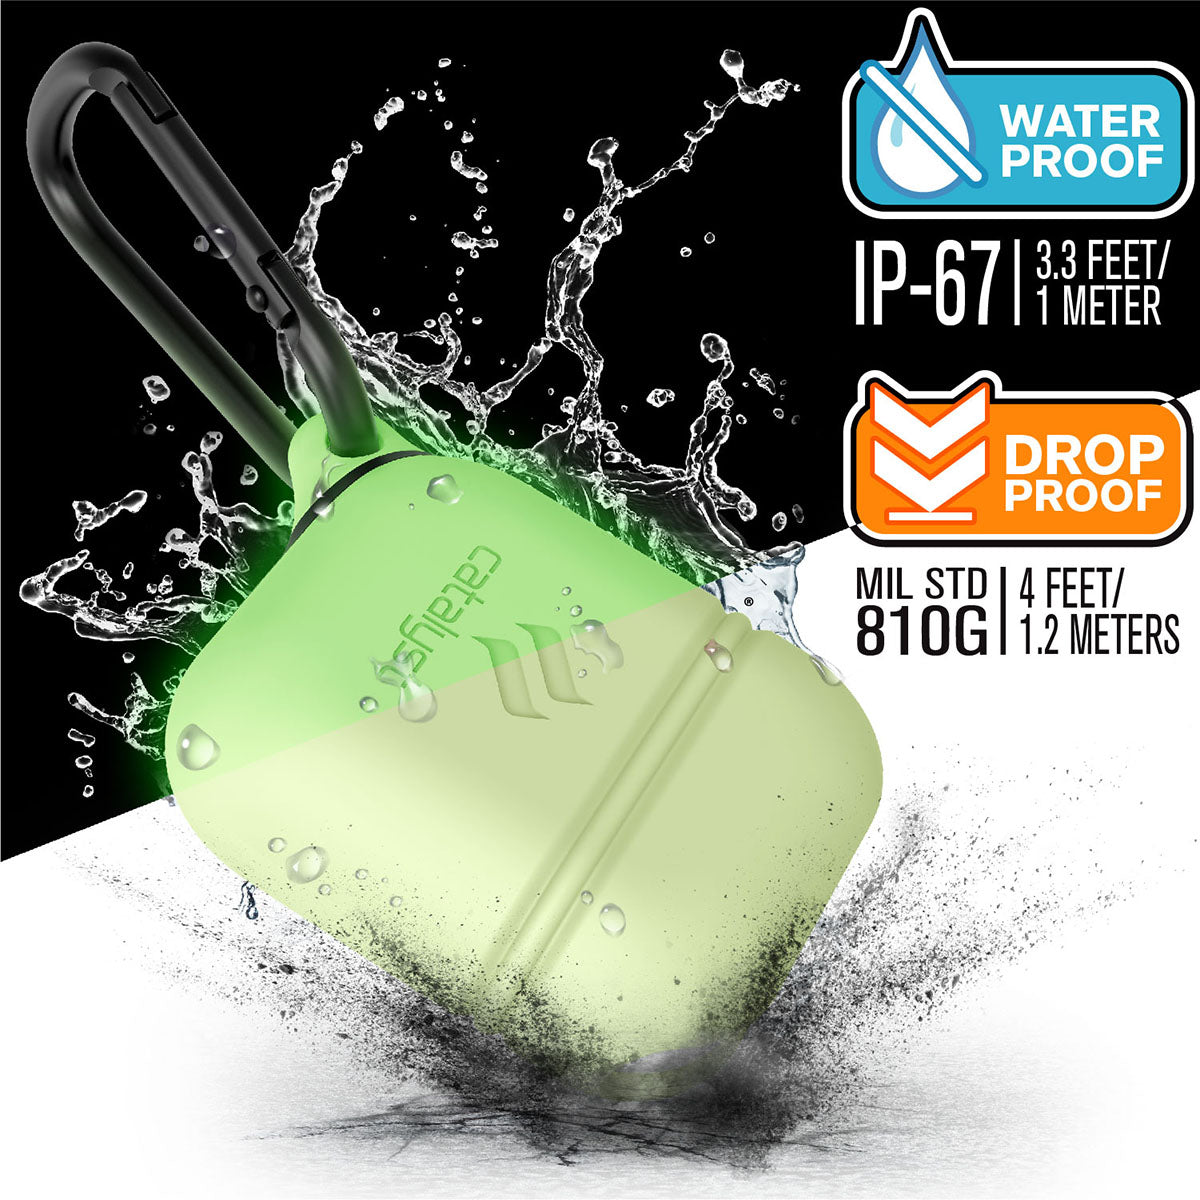 CATAPDGITD-FBA | Catalyst airpods gen2/1 waterproof case + carabiner showing the case drop proof and water proof features with attached carabiner in glow in the dark text reads water proof IP-67 3.3 FEET/1 METER DROP PROOF MIL STD 810G 1.2 METERS